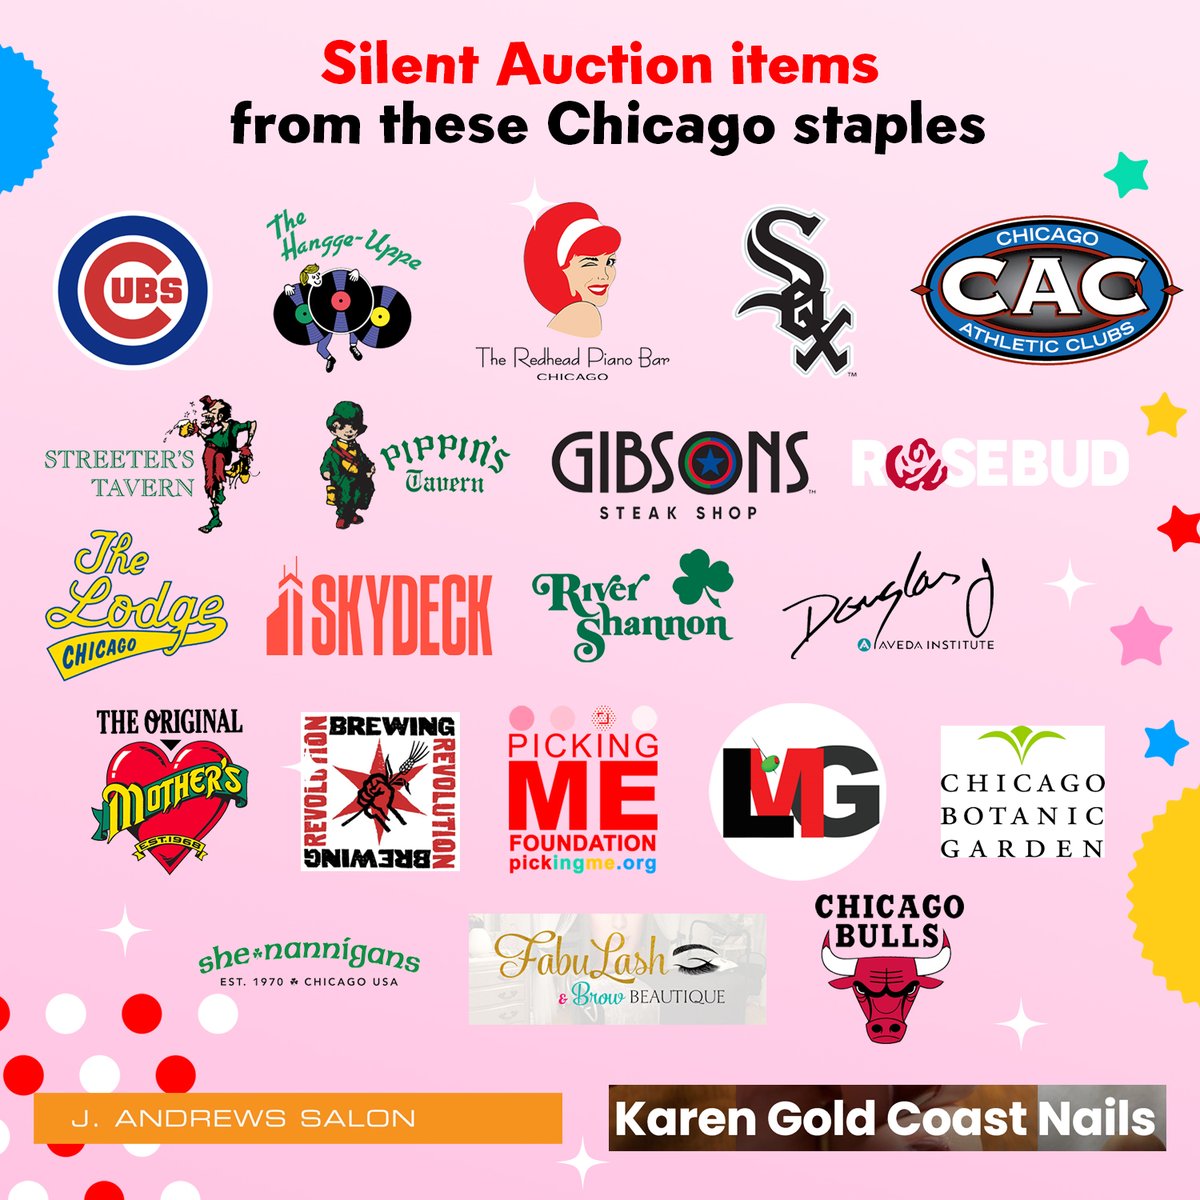 Chicago fam! Join us for our 8th Annual Mental (W)illness fundraiser this #MentalHealthMonth! The night will include an epic silent auction, filled with amazing items from core Chicago institutions like the Chicago Cubs, The Lodge, Gibsons and more
pickingme.org/mentalwillness